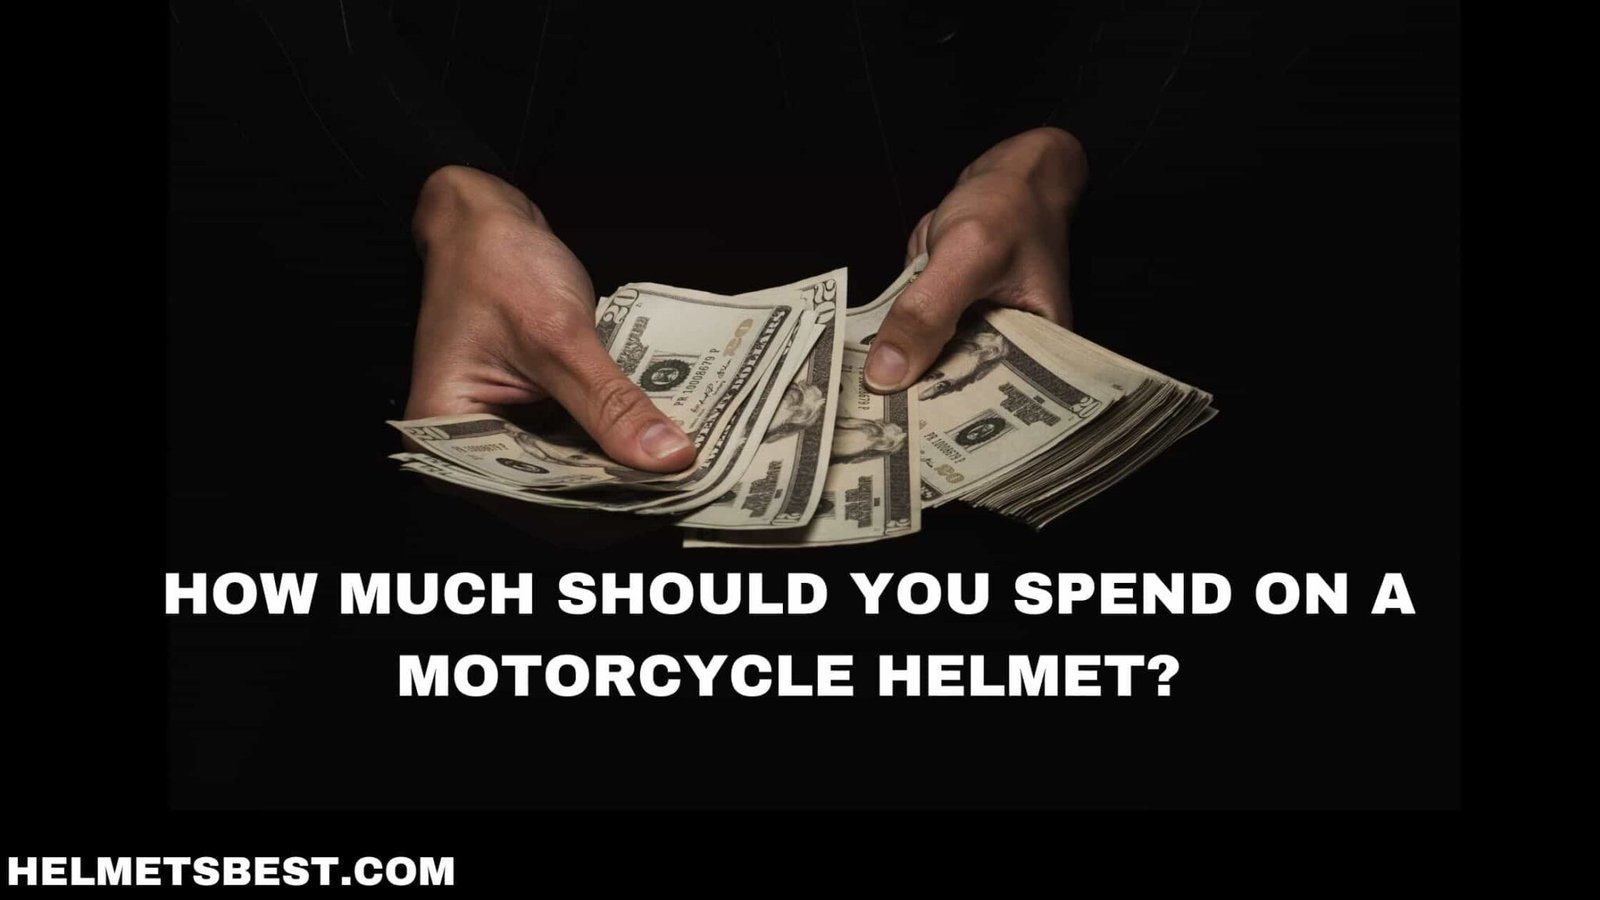 How Much Should You Spend on a Motorcycle Helmet in 2023?